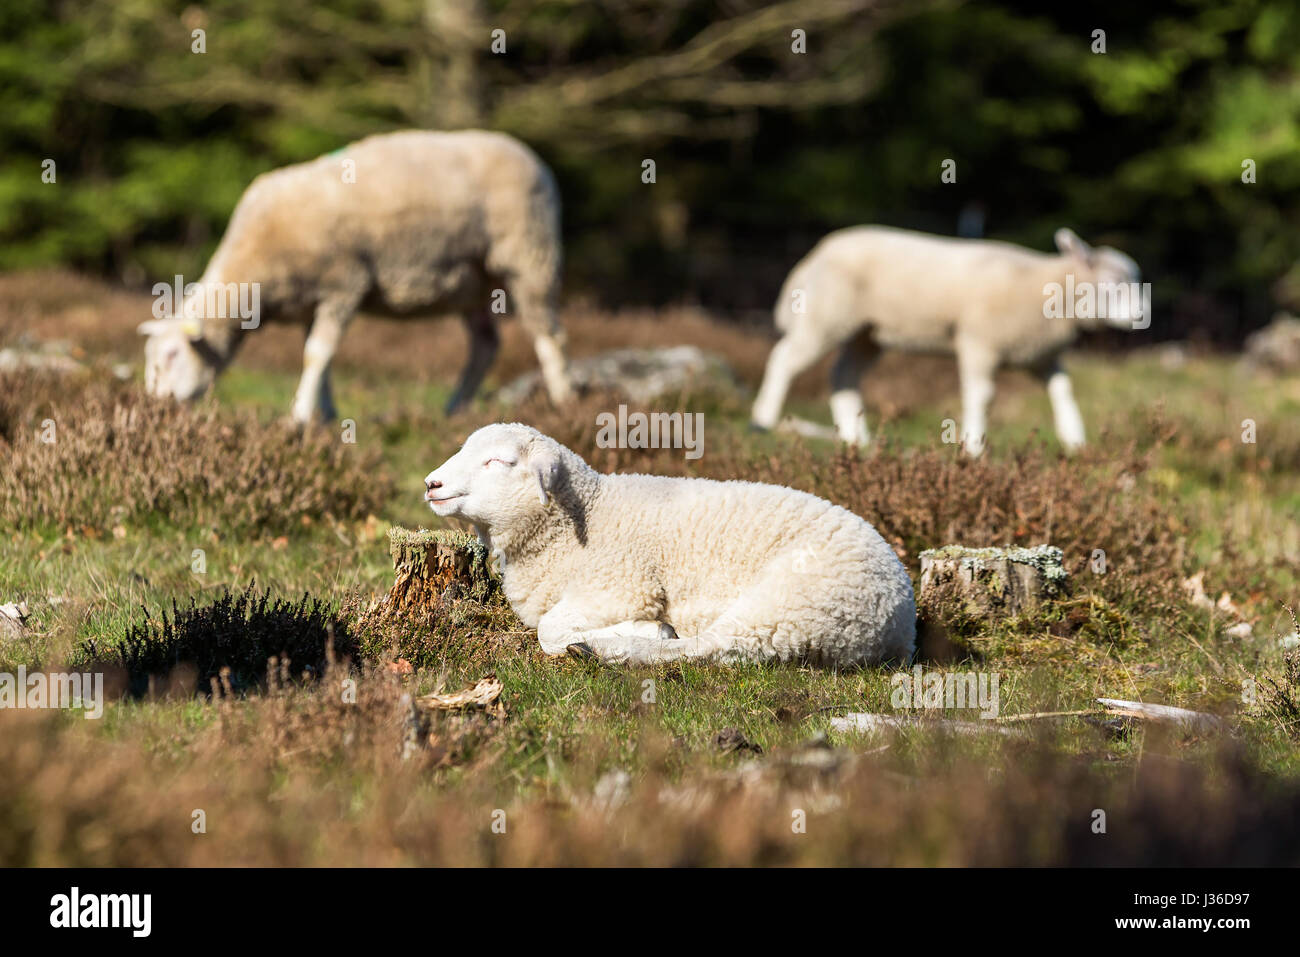 Lamb resting among heather and enjoying the spring sunshine. Other sheep blurred in the background. Stock Photo